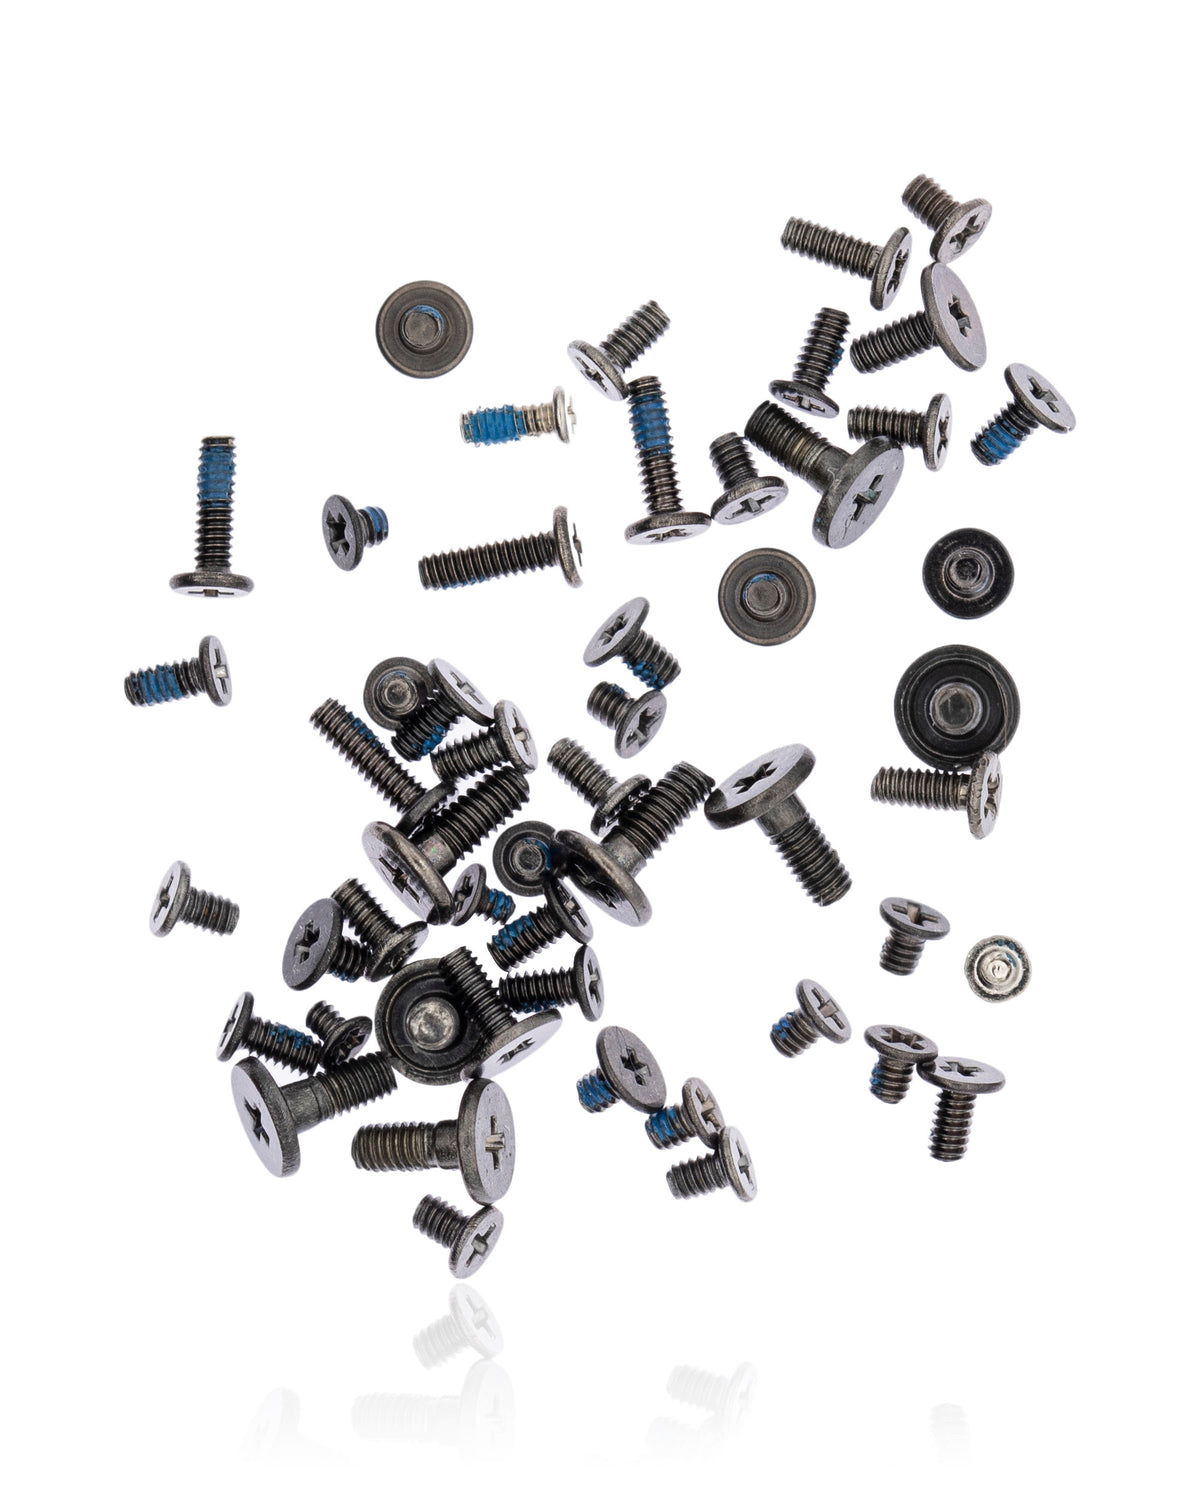 COMPLETE SCREW SET COMPATIBLE WITH IPAD AIR 2